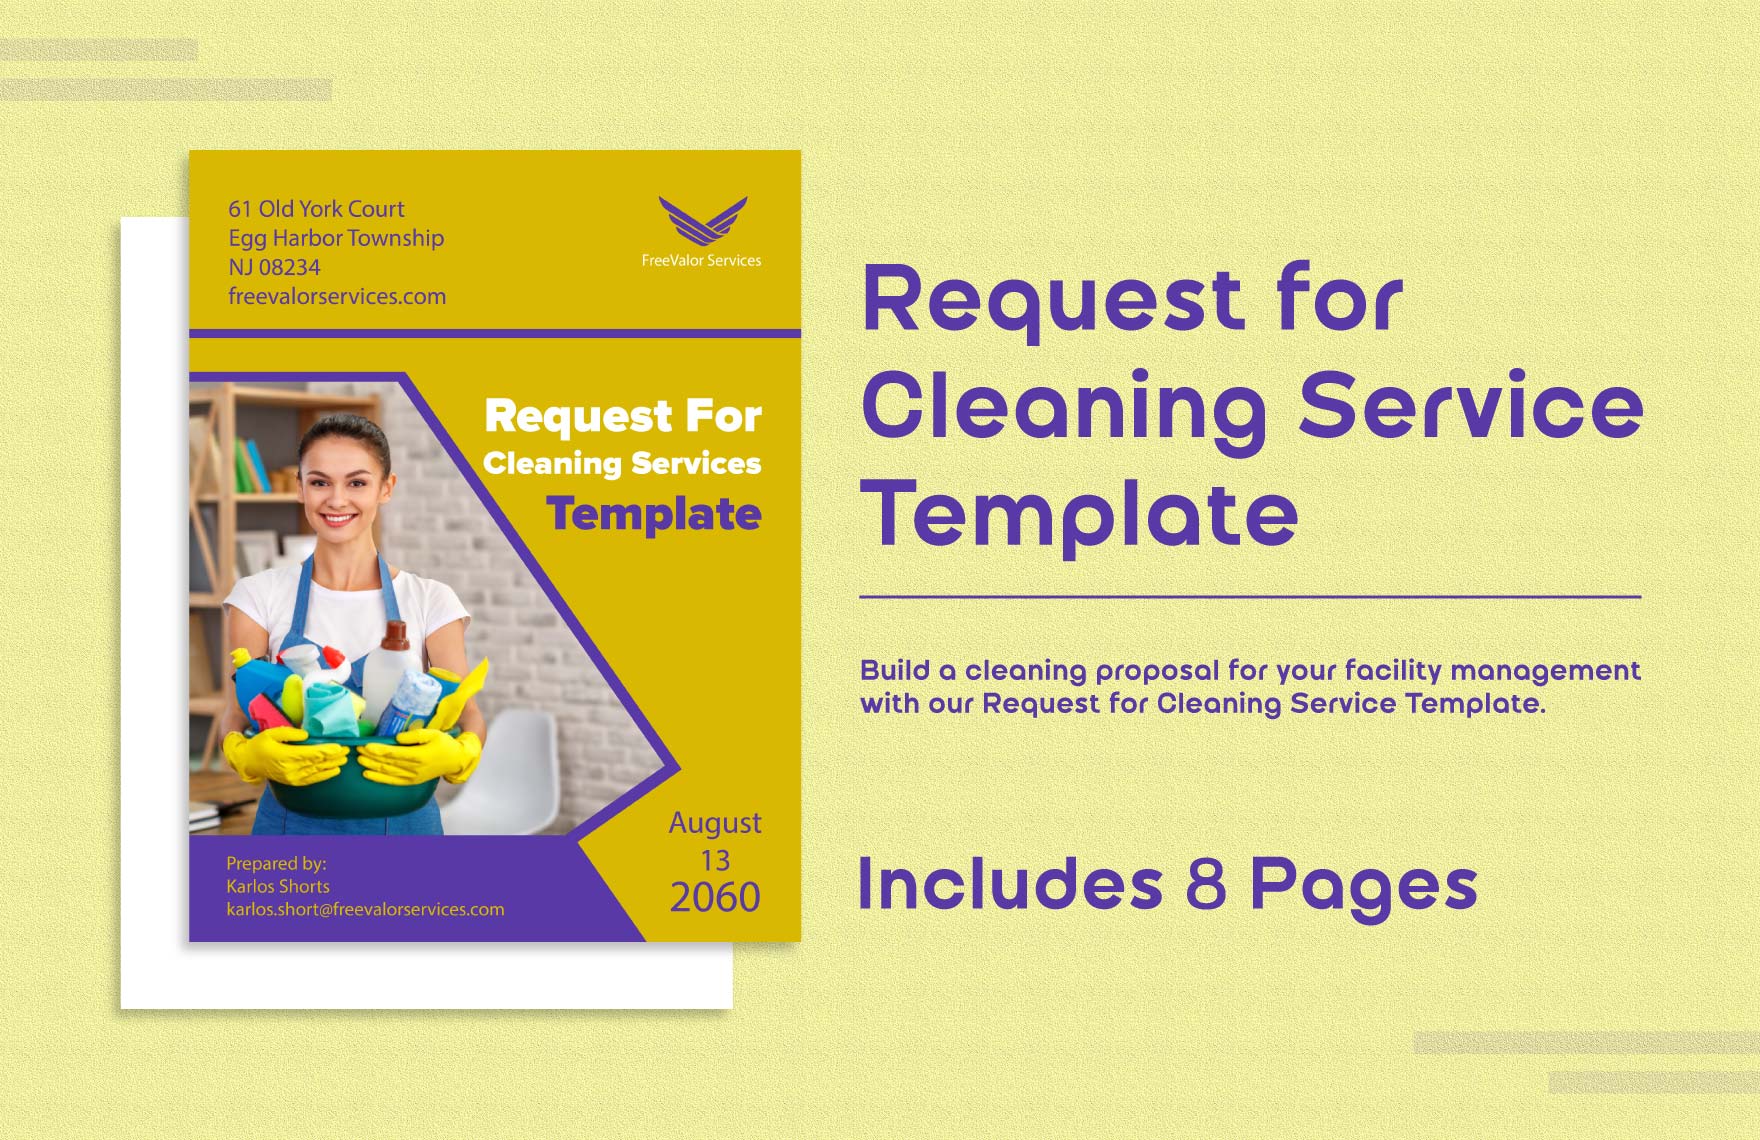 Request for Cleaning Service Template